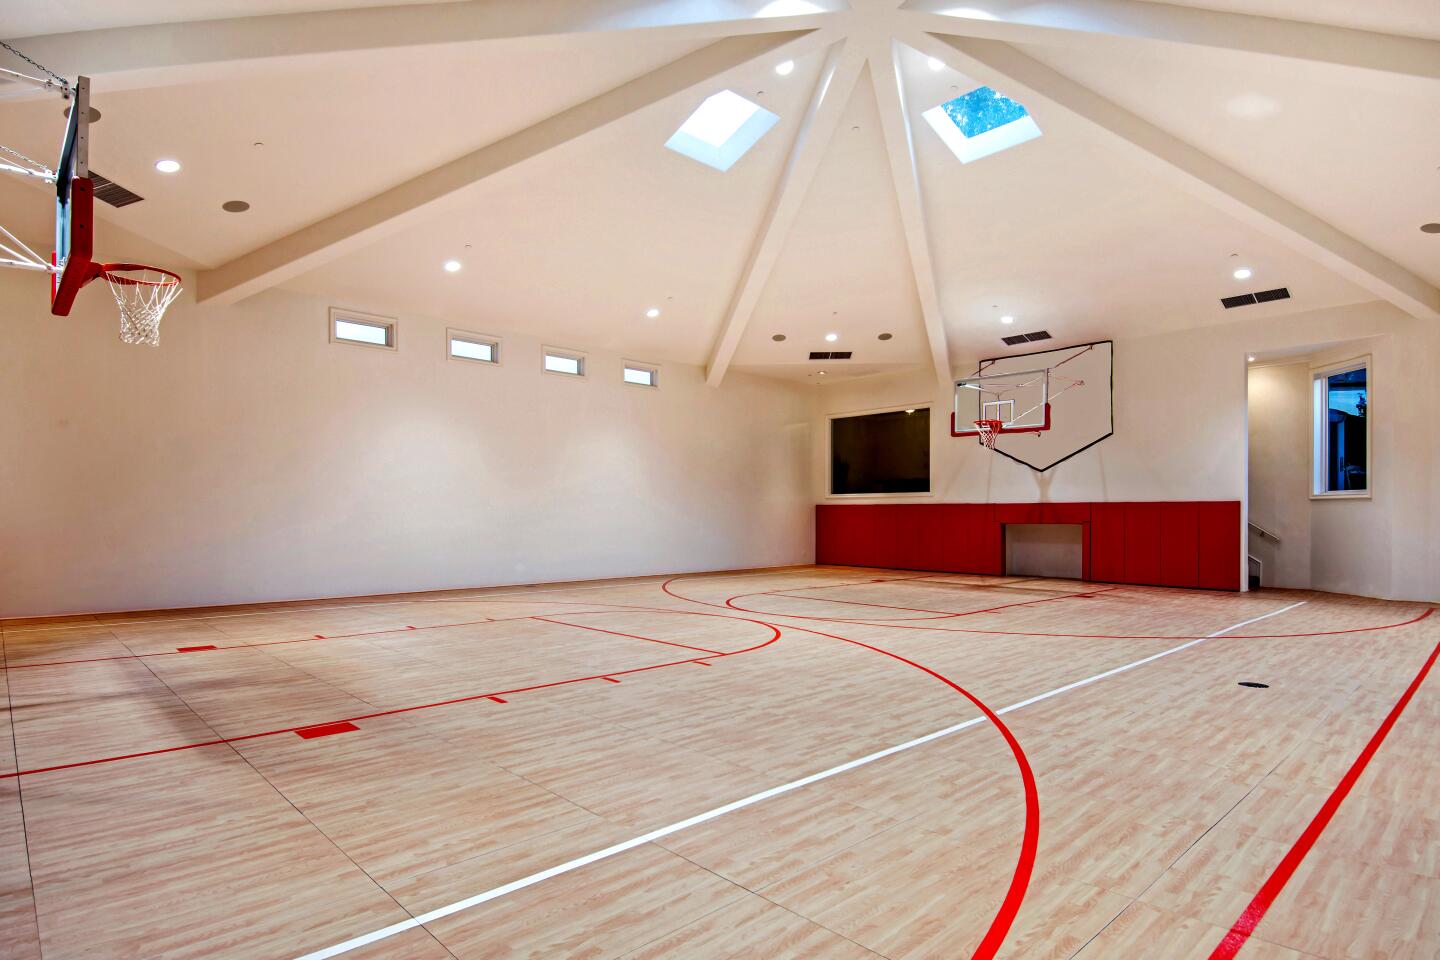 The indoor basketball court features a scoreboard, skylights and a viewing box.